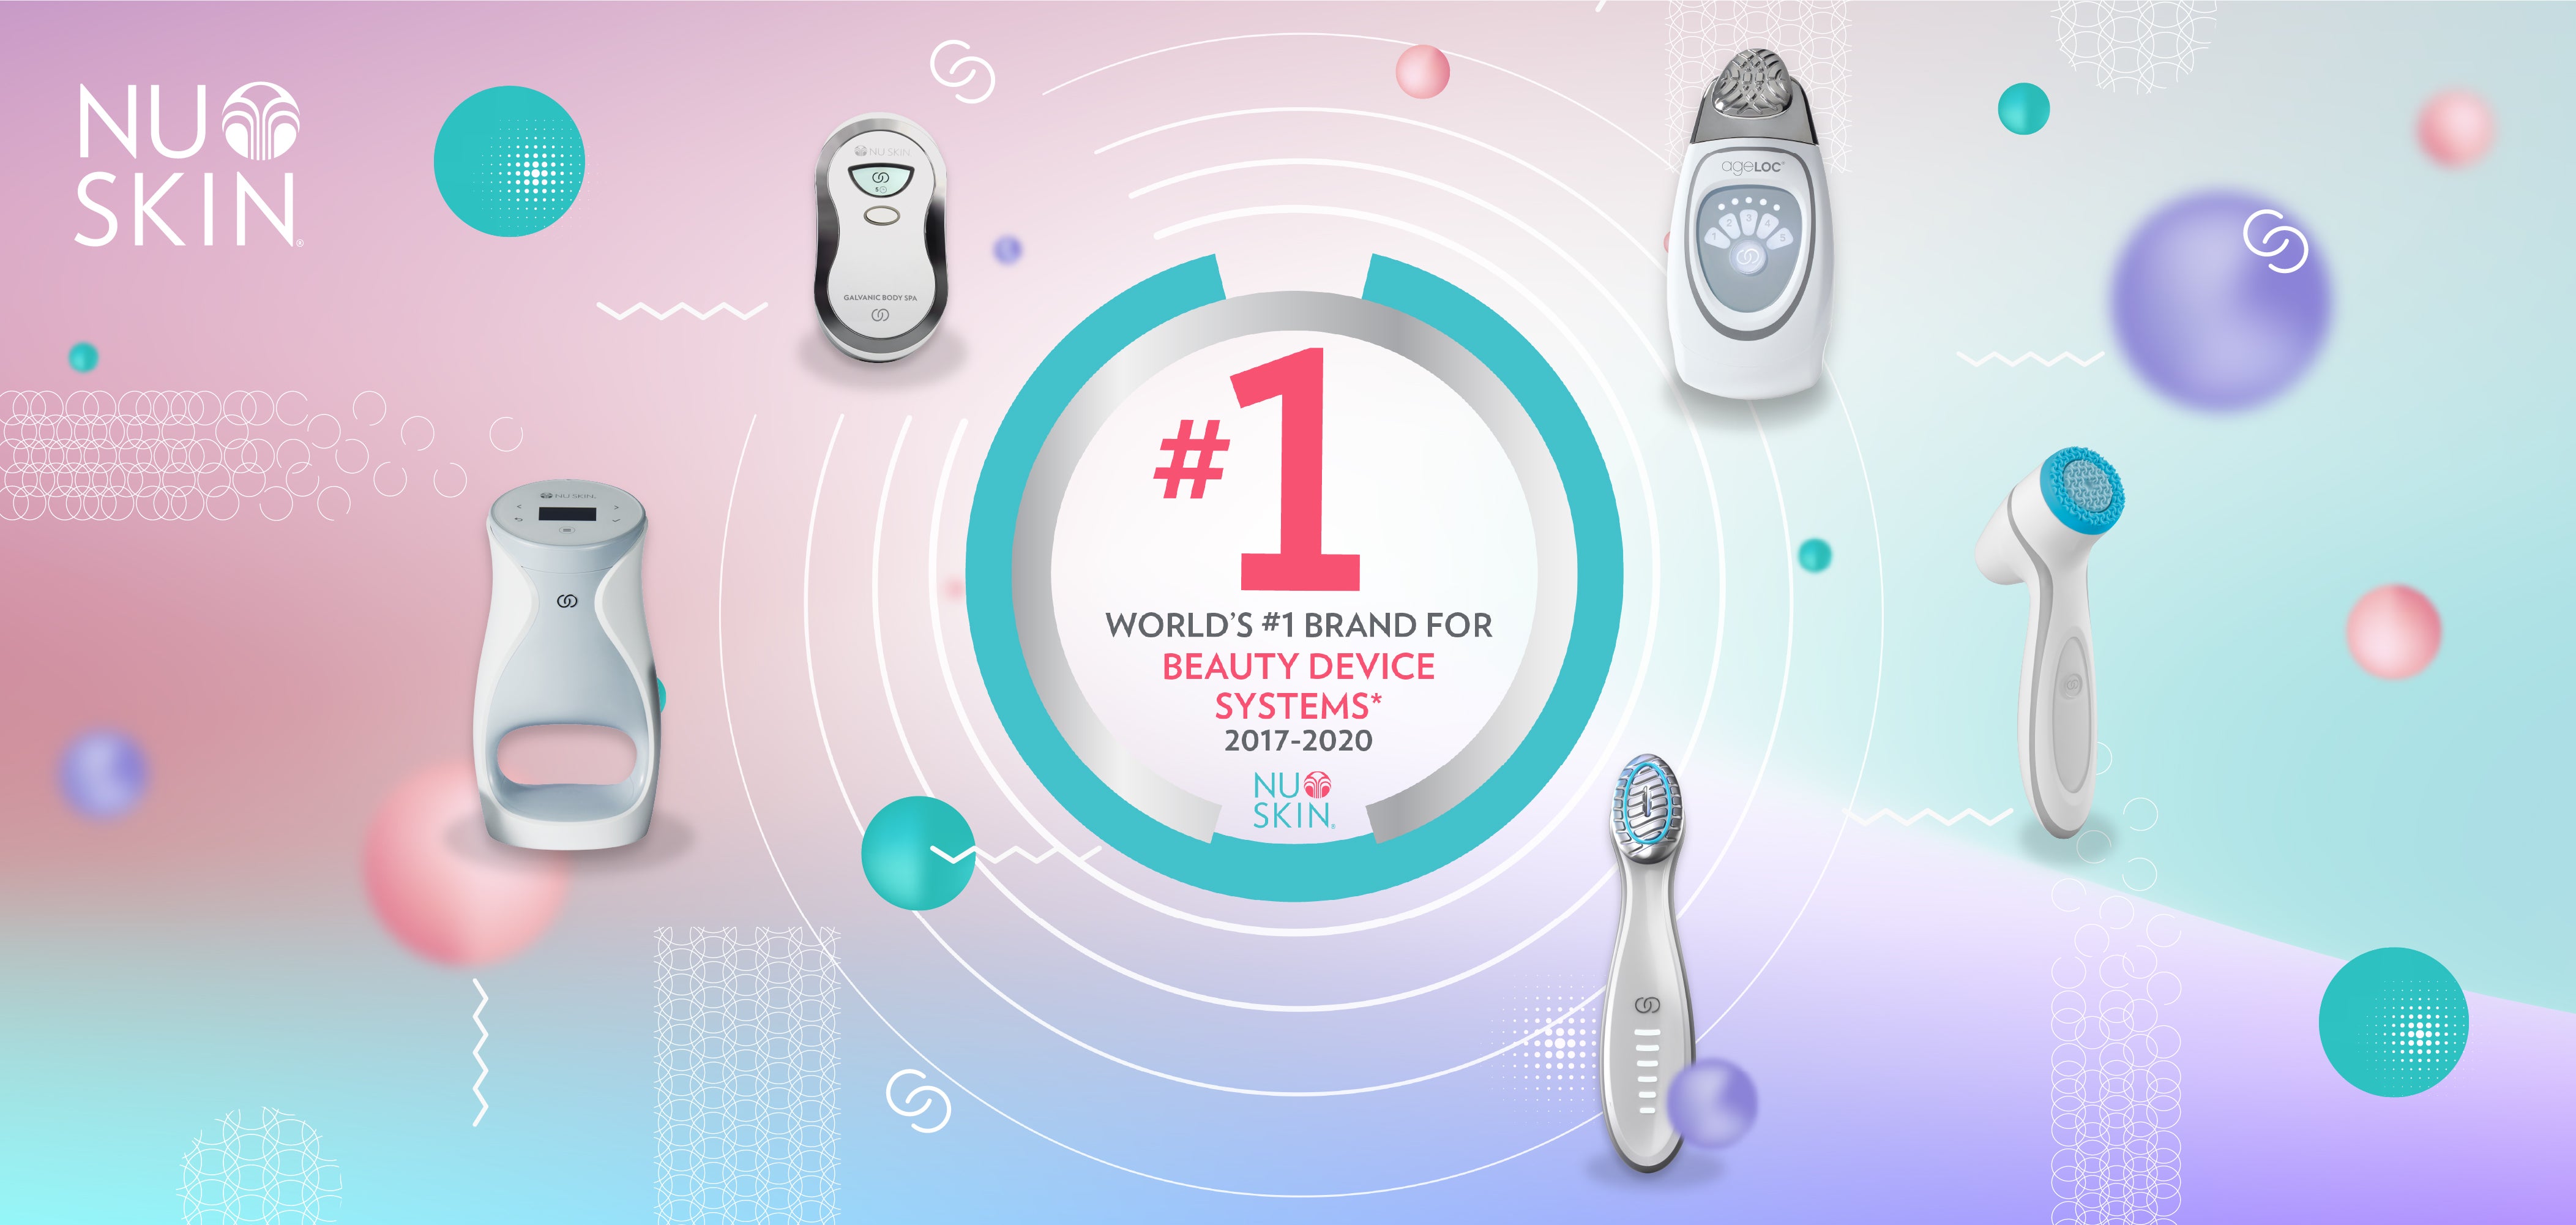 Nu Skin is The World&#39;s #1 Brand for Beauty Device Systems, in succession  for 4 years! (1 April, 2021)